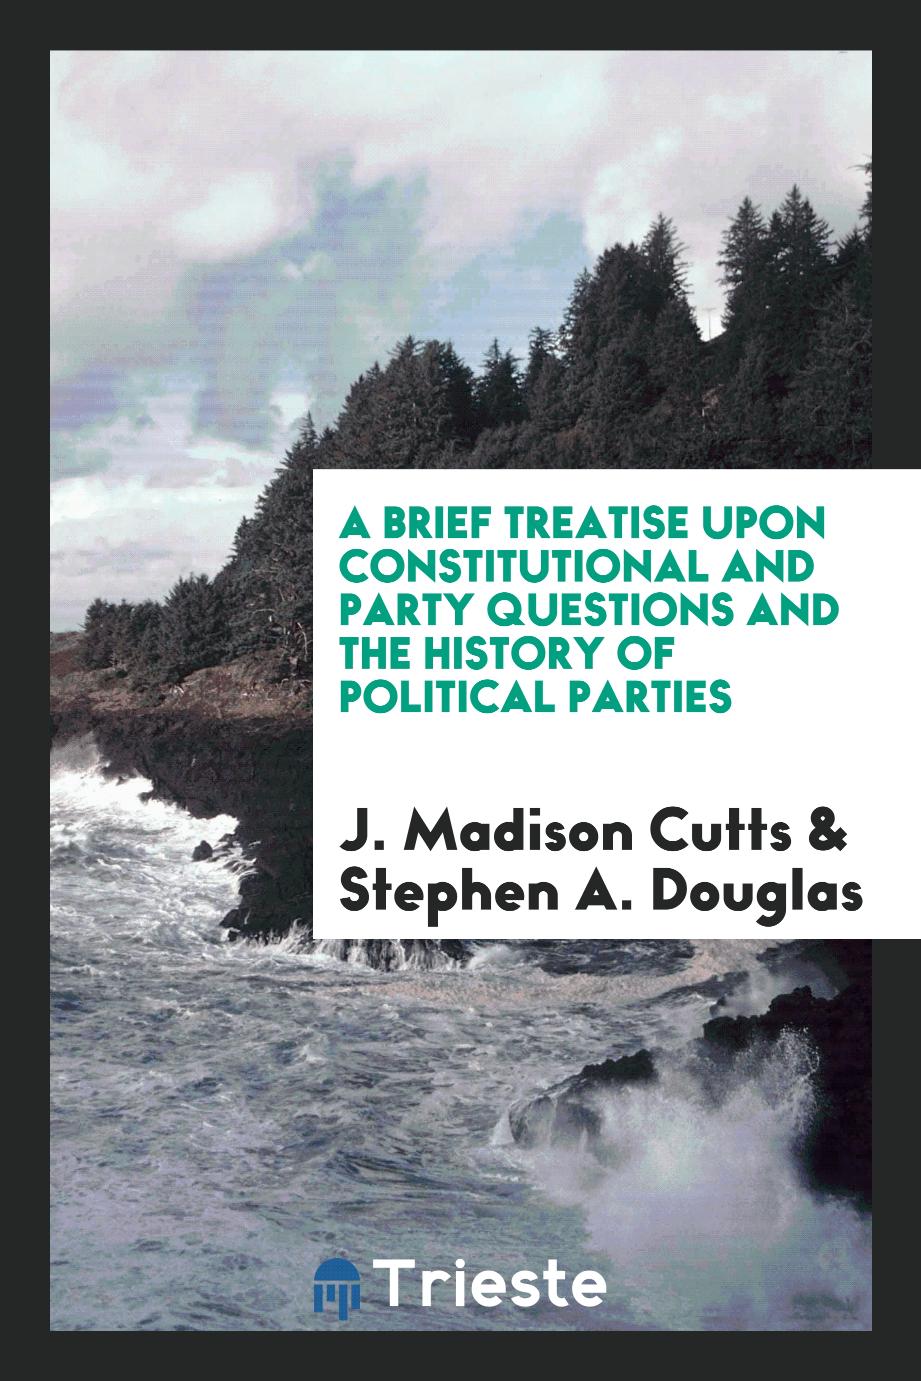 A Brief Treatise upon Constitutional and Party Questions and the History of Political Parties